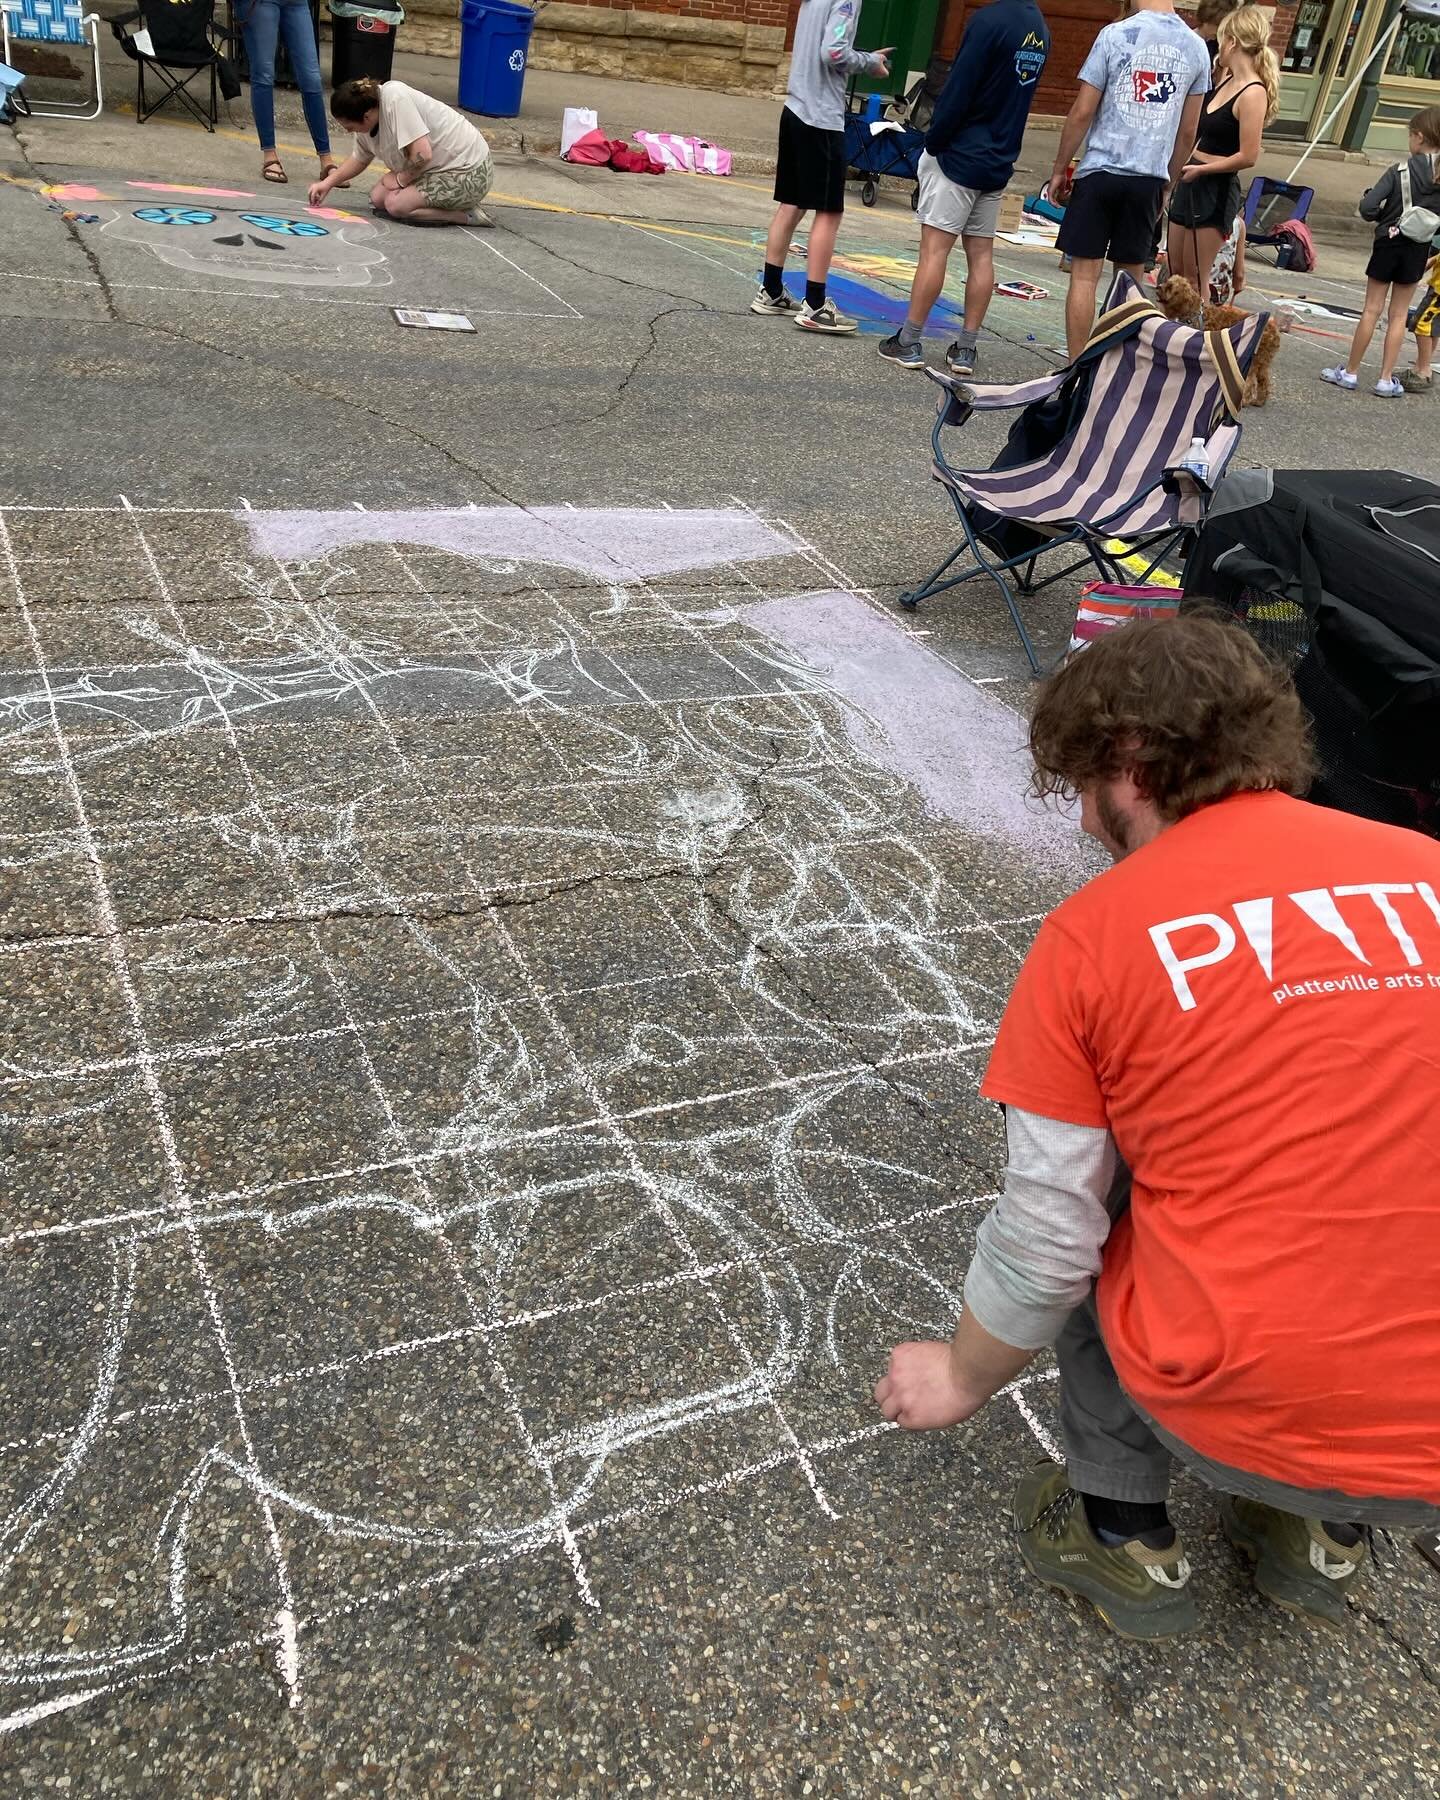 Over the weekend, we attended Chalk the Walk in @mountvernonia. In order to celebrate chalk and comics on @free_comic_book_day, I decided to blow up my @redsonjaofficial illustration to a MASSIVE 8 by 10 feet! She turned out glorious. Thanks for havi